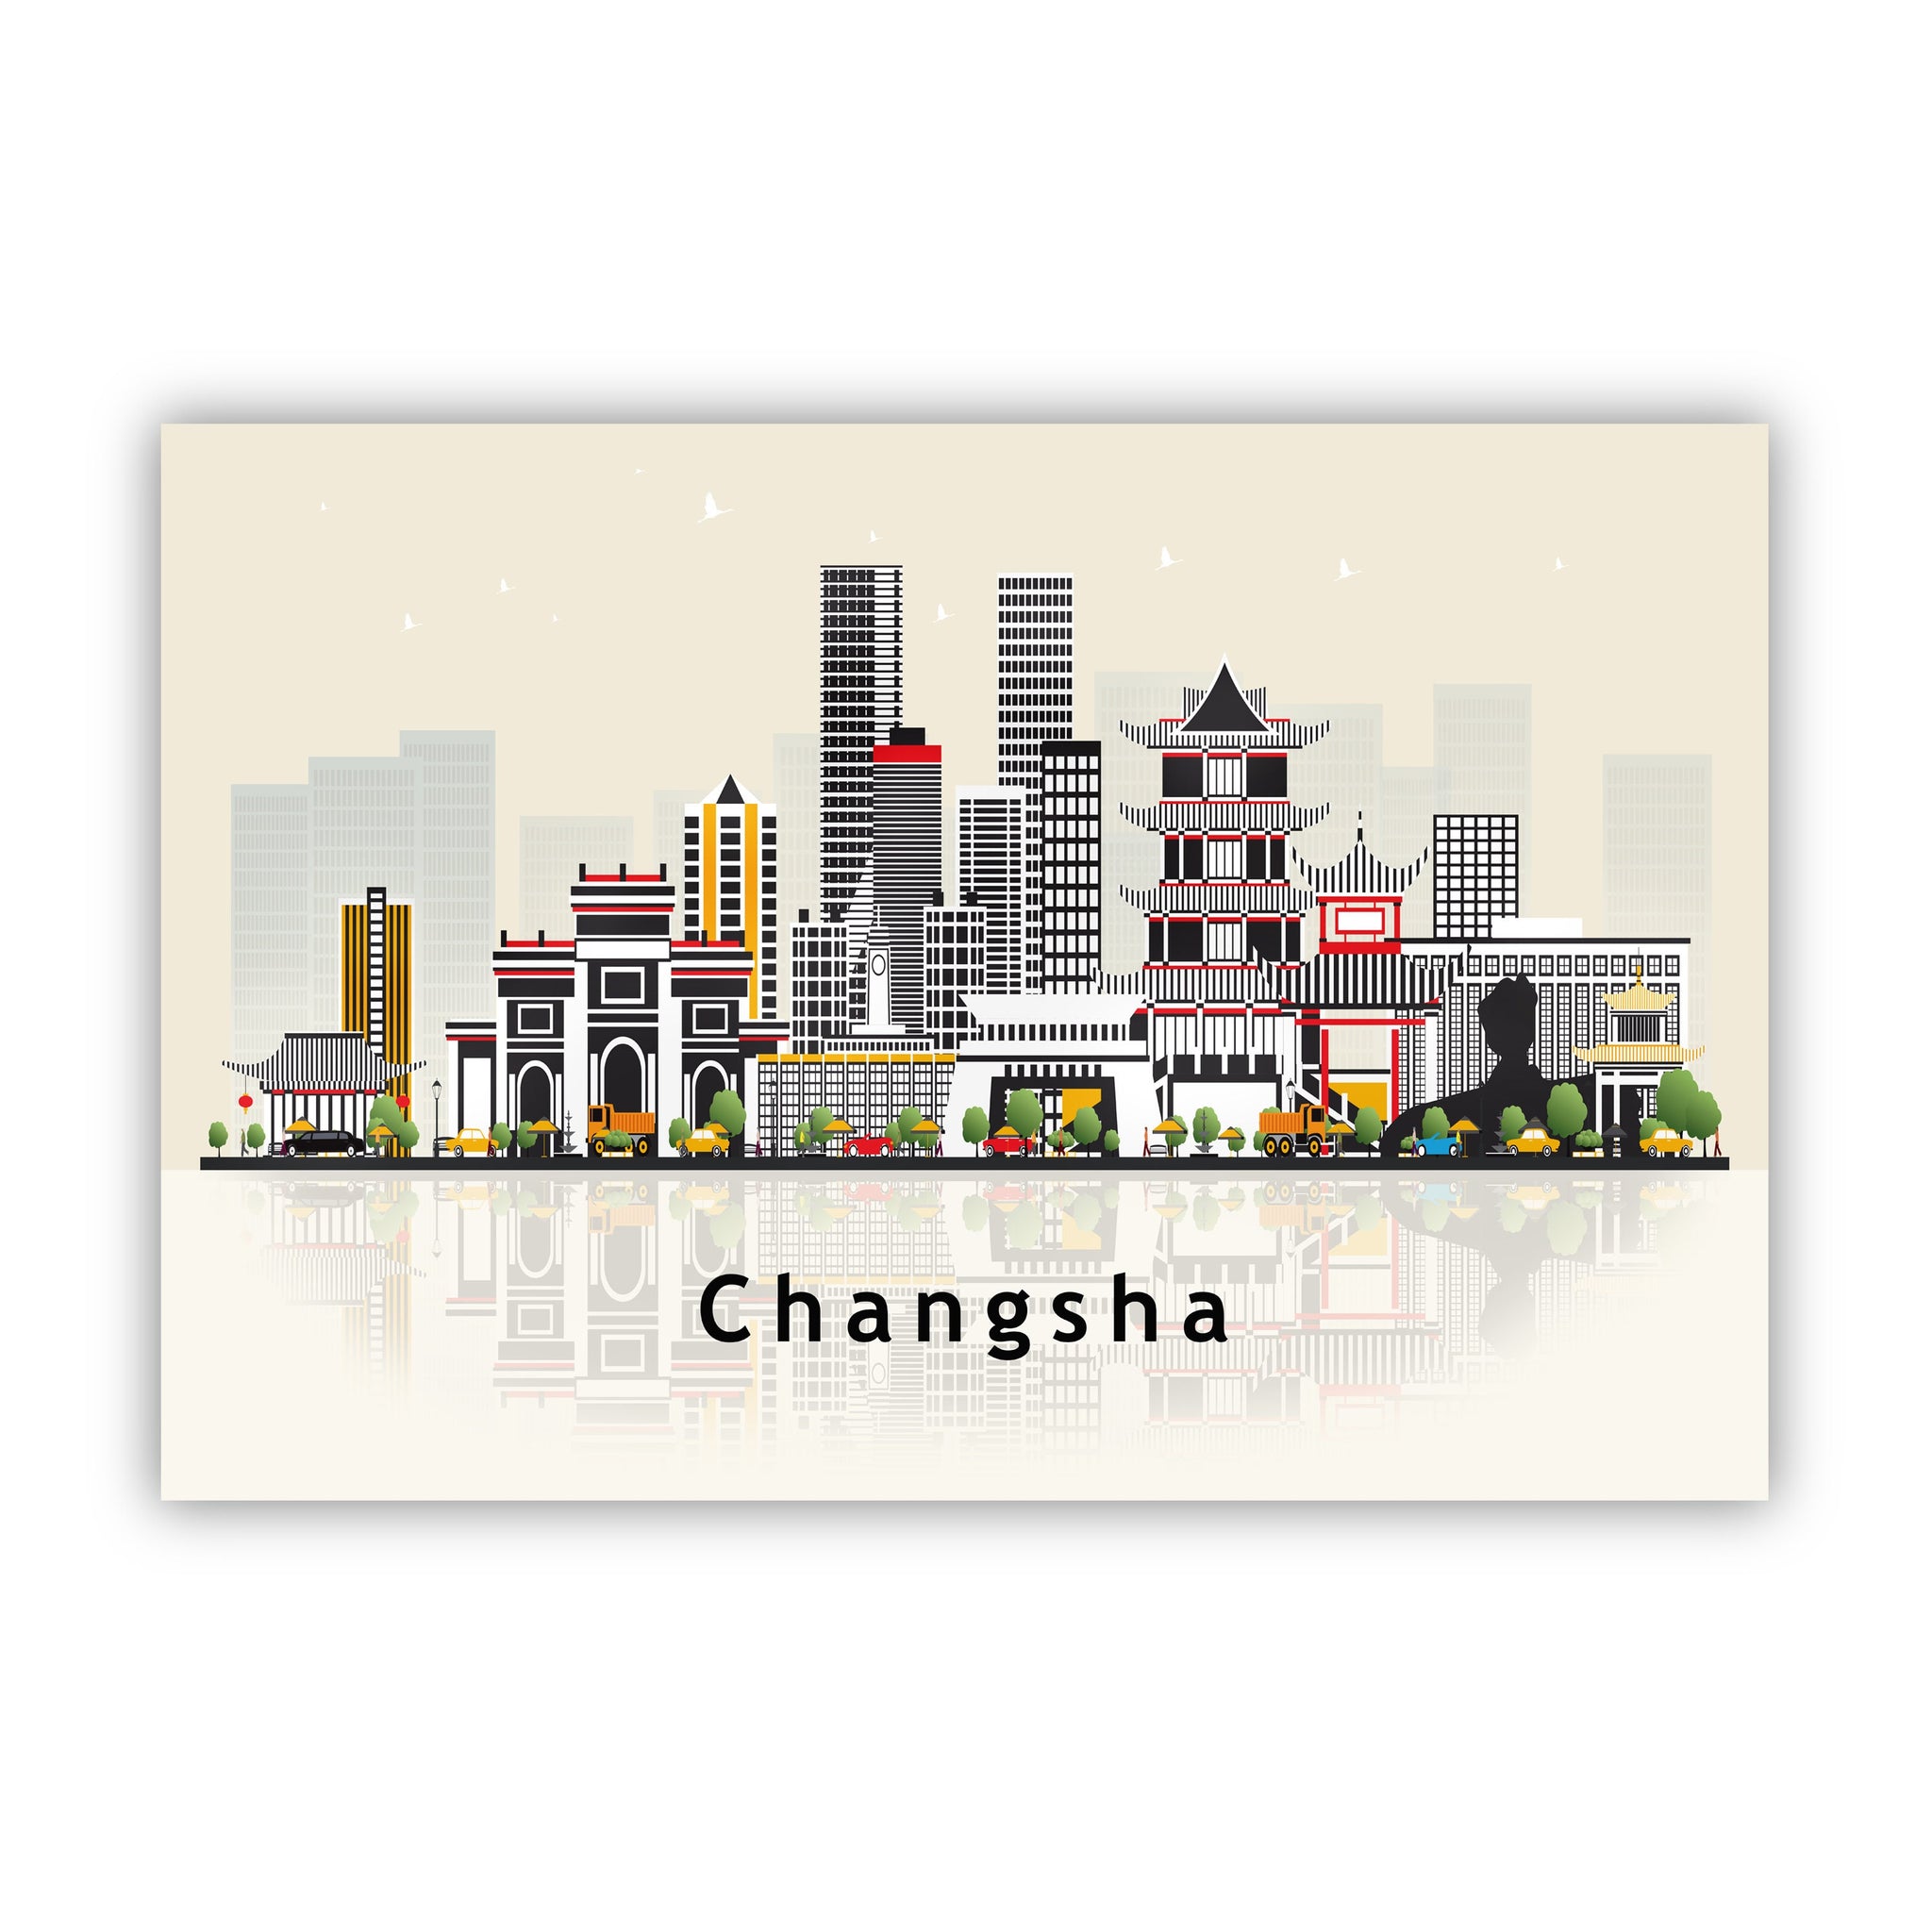 CHANGSHA CHINA Illustration skyline poster, Modern skyline cityscape poster, China city skyline landmark map poster, Home wall decoration